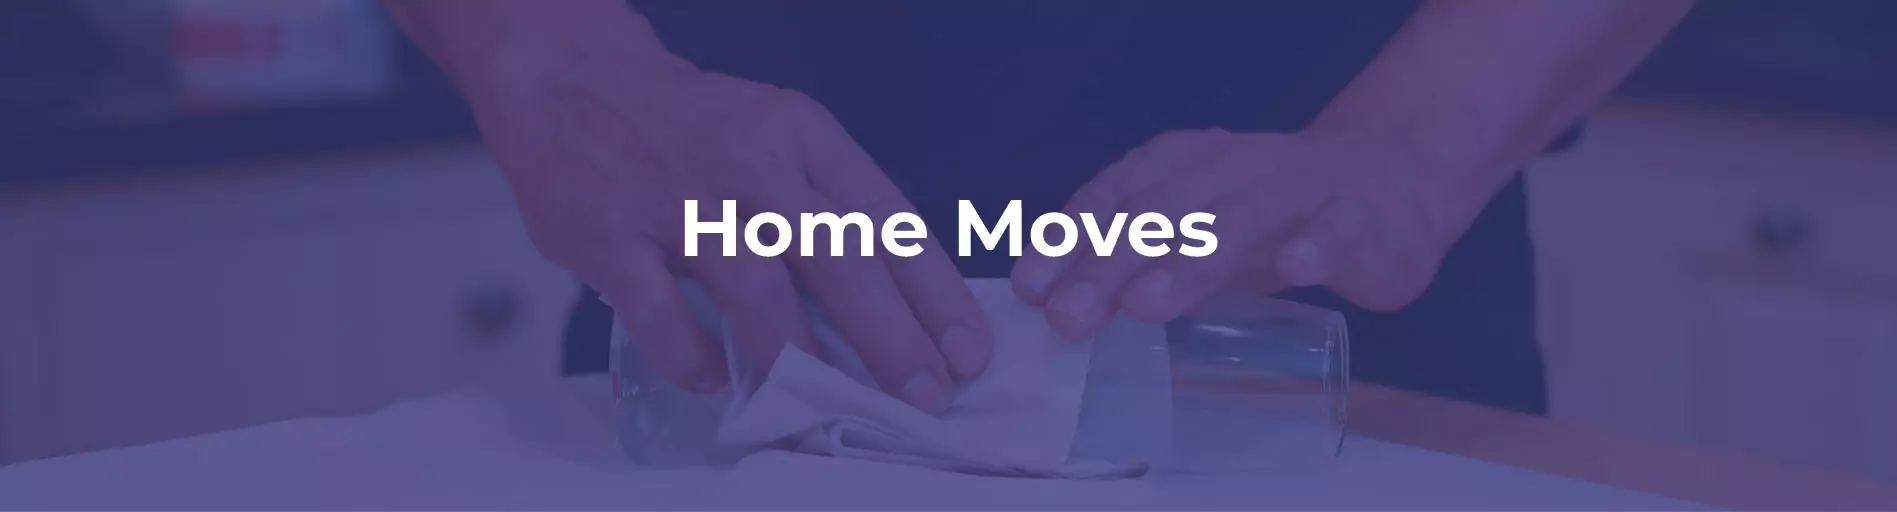 easy shipping home moves provider